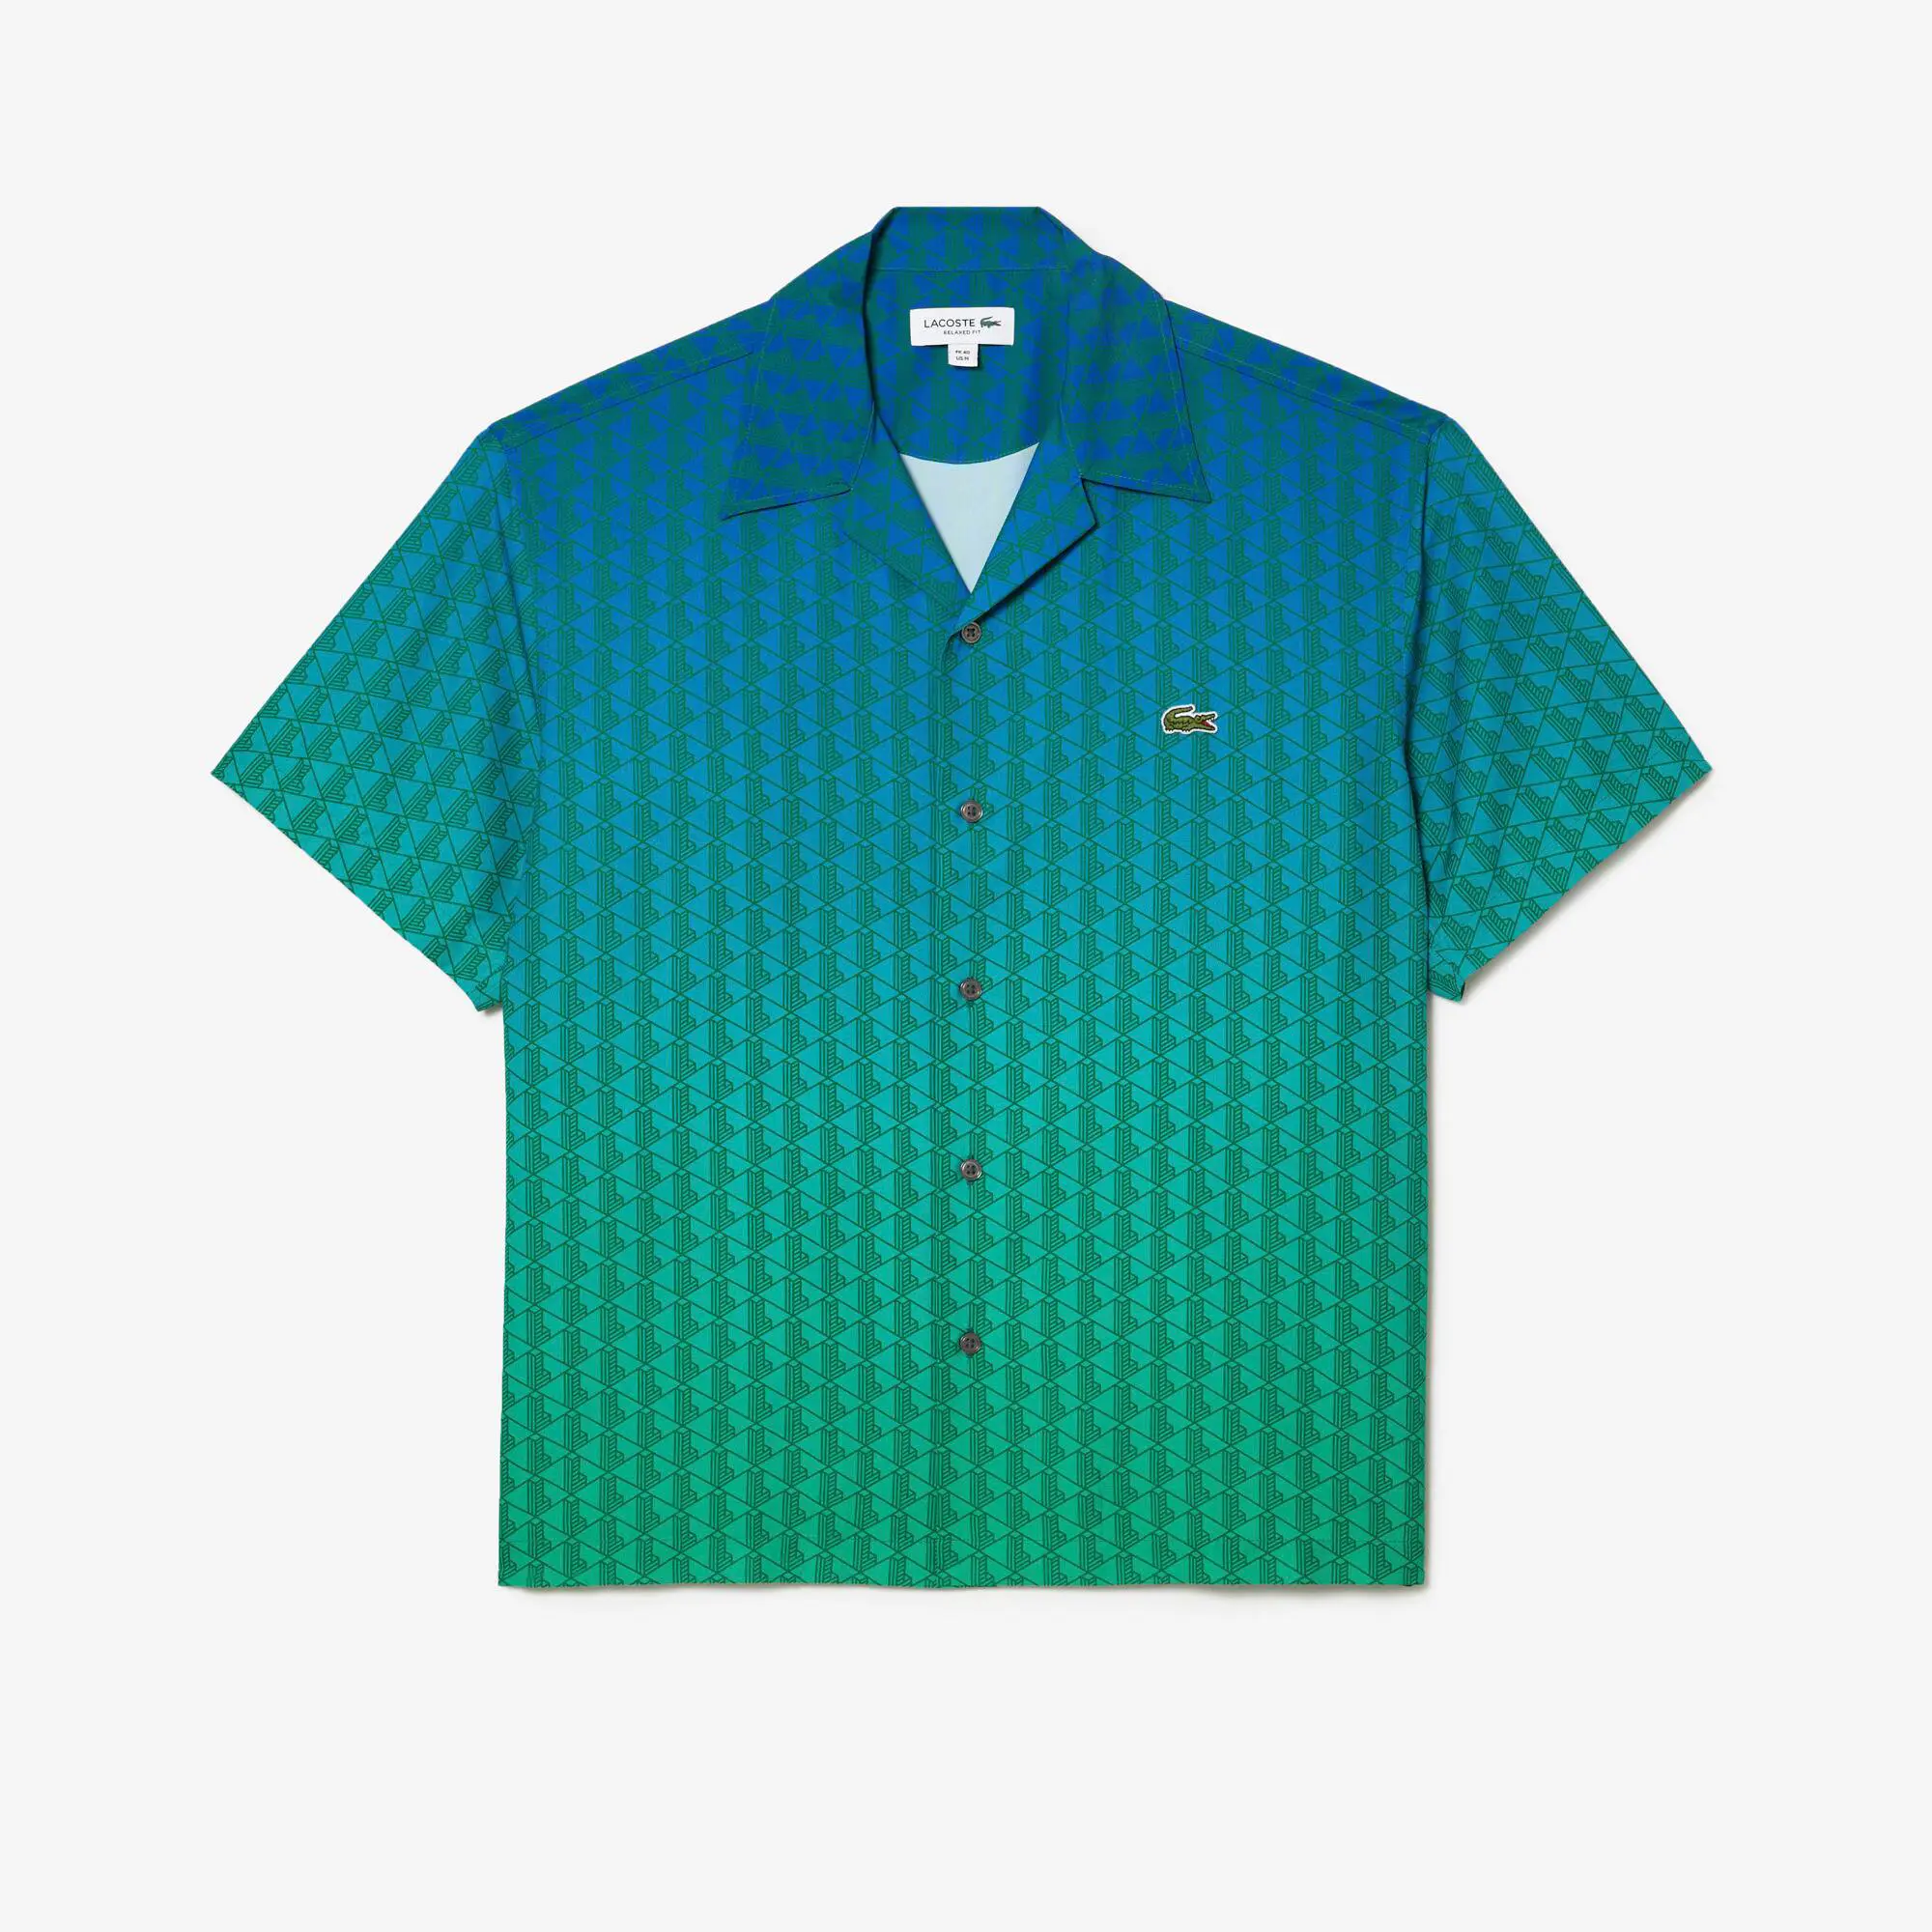 Lacoste Short Sleeved Ombré Effect UV Protect Shirt. 1